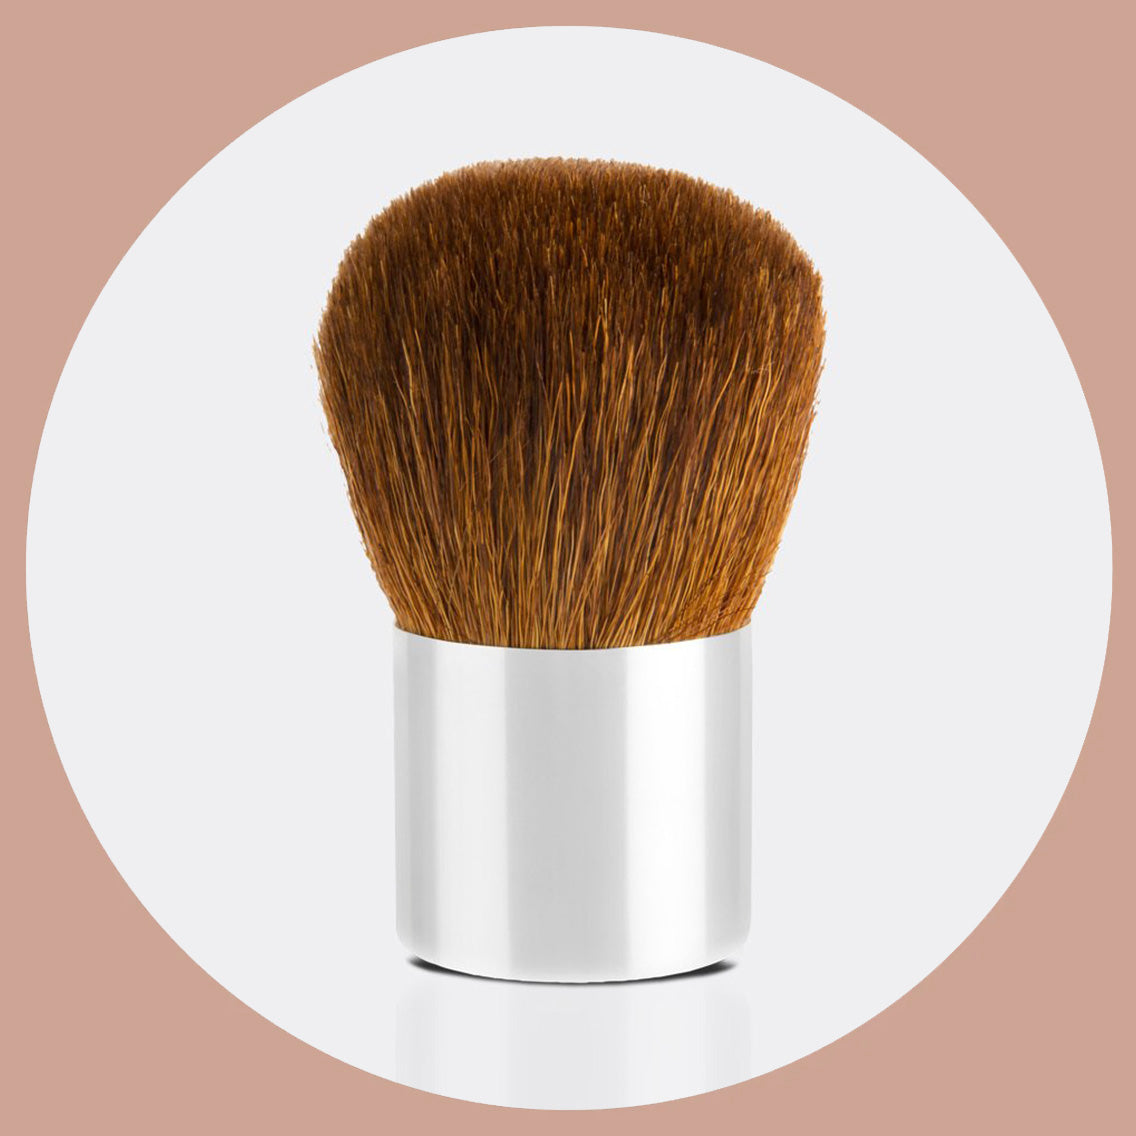 Antipodes Kabuki Brush Mineral Foundation PRO | Beauty Spa Wellbeing Online